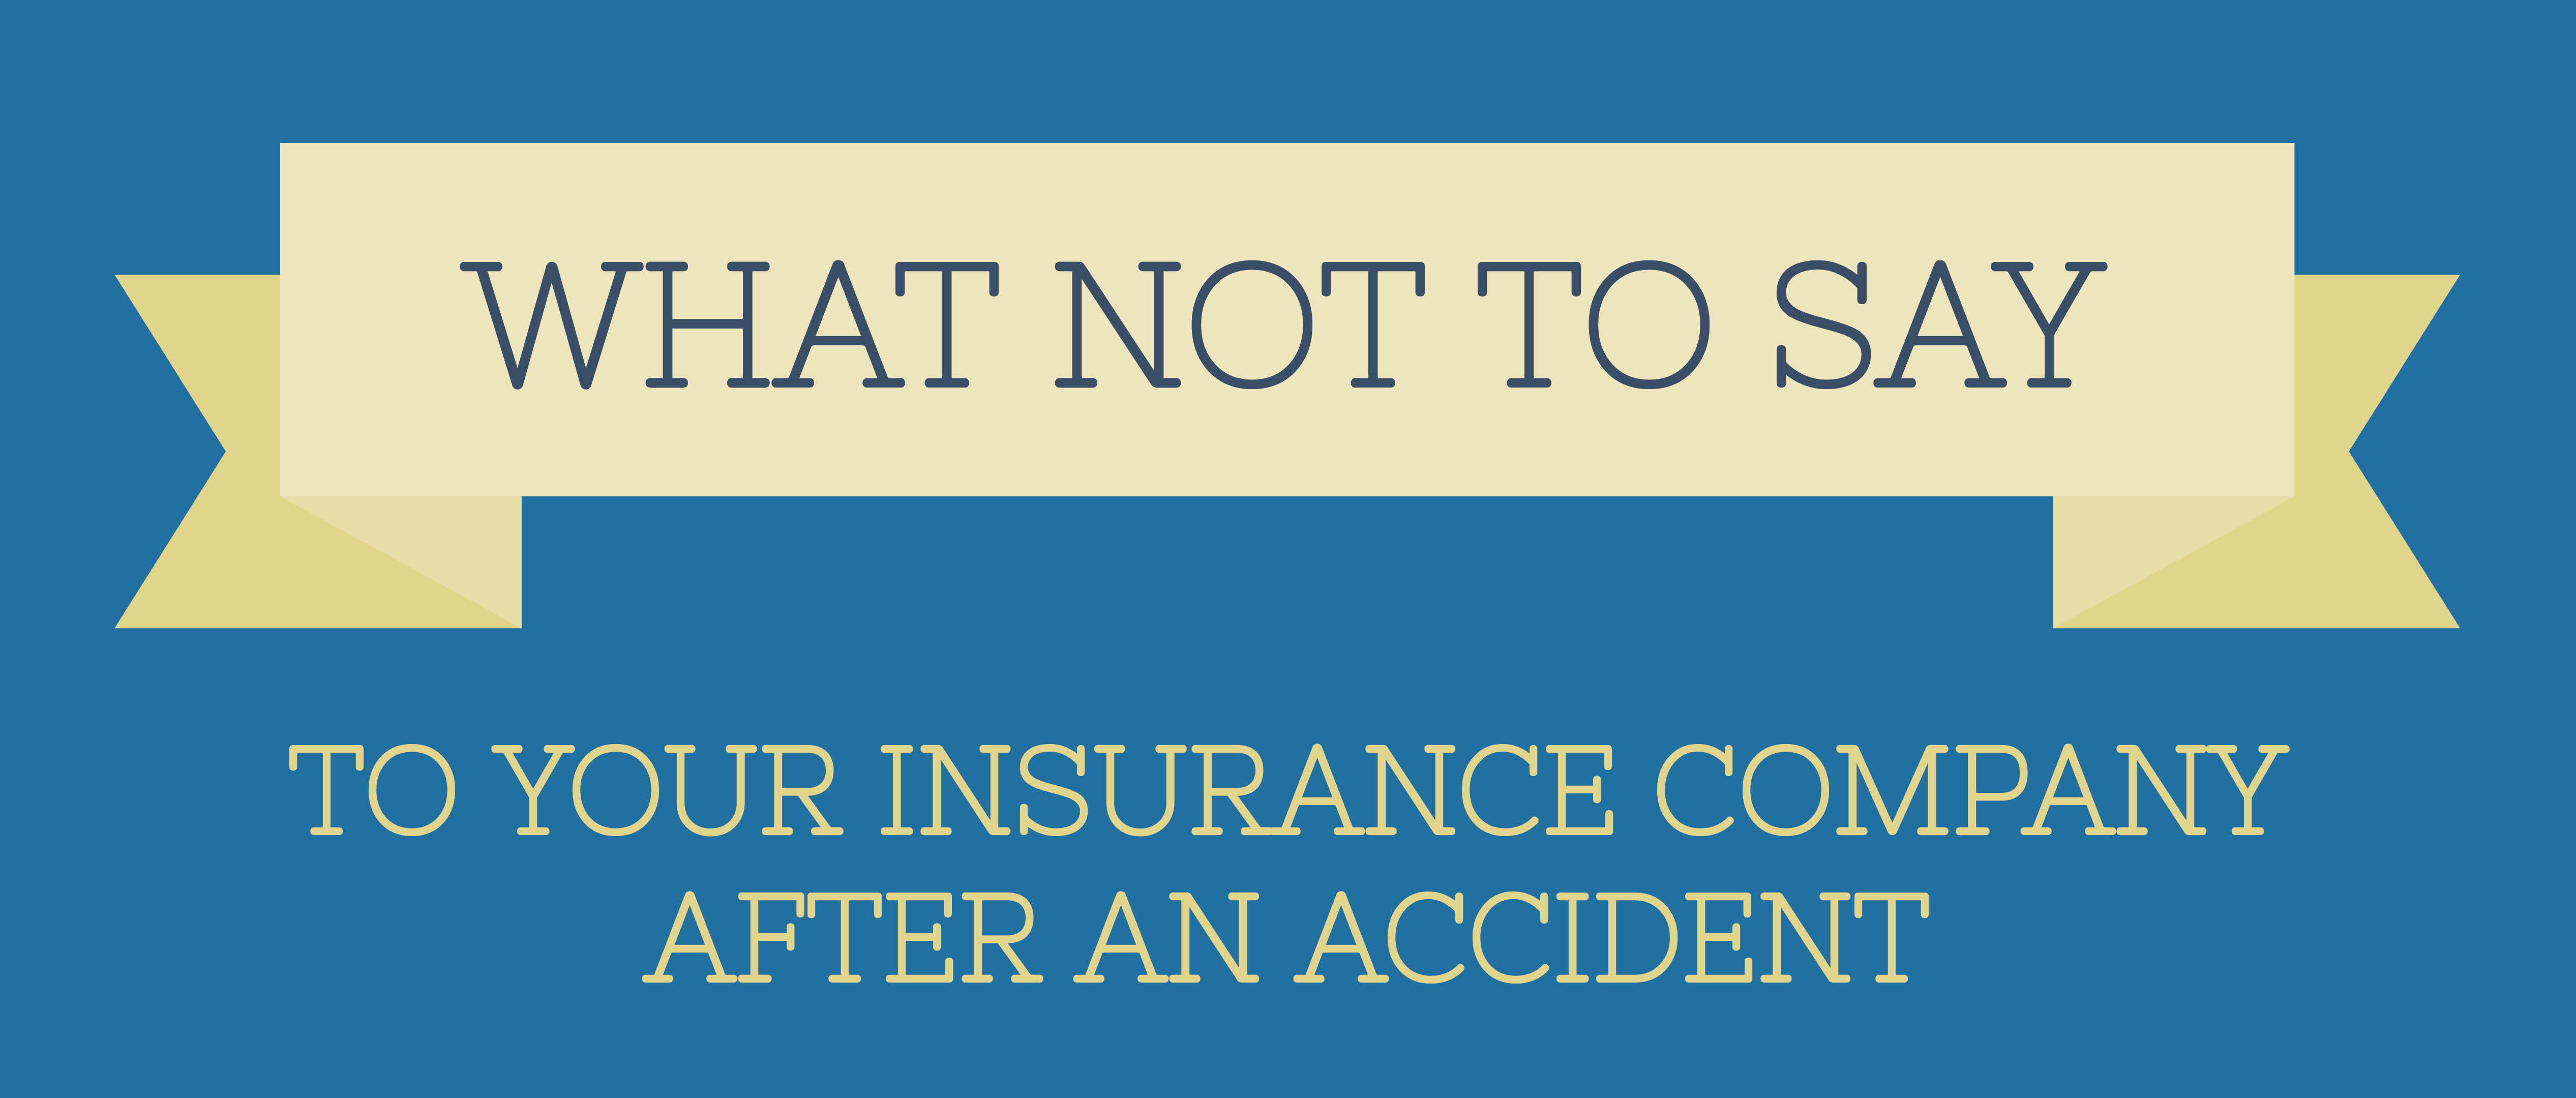 what not to say to your insurance company after an accident infographic header